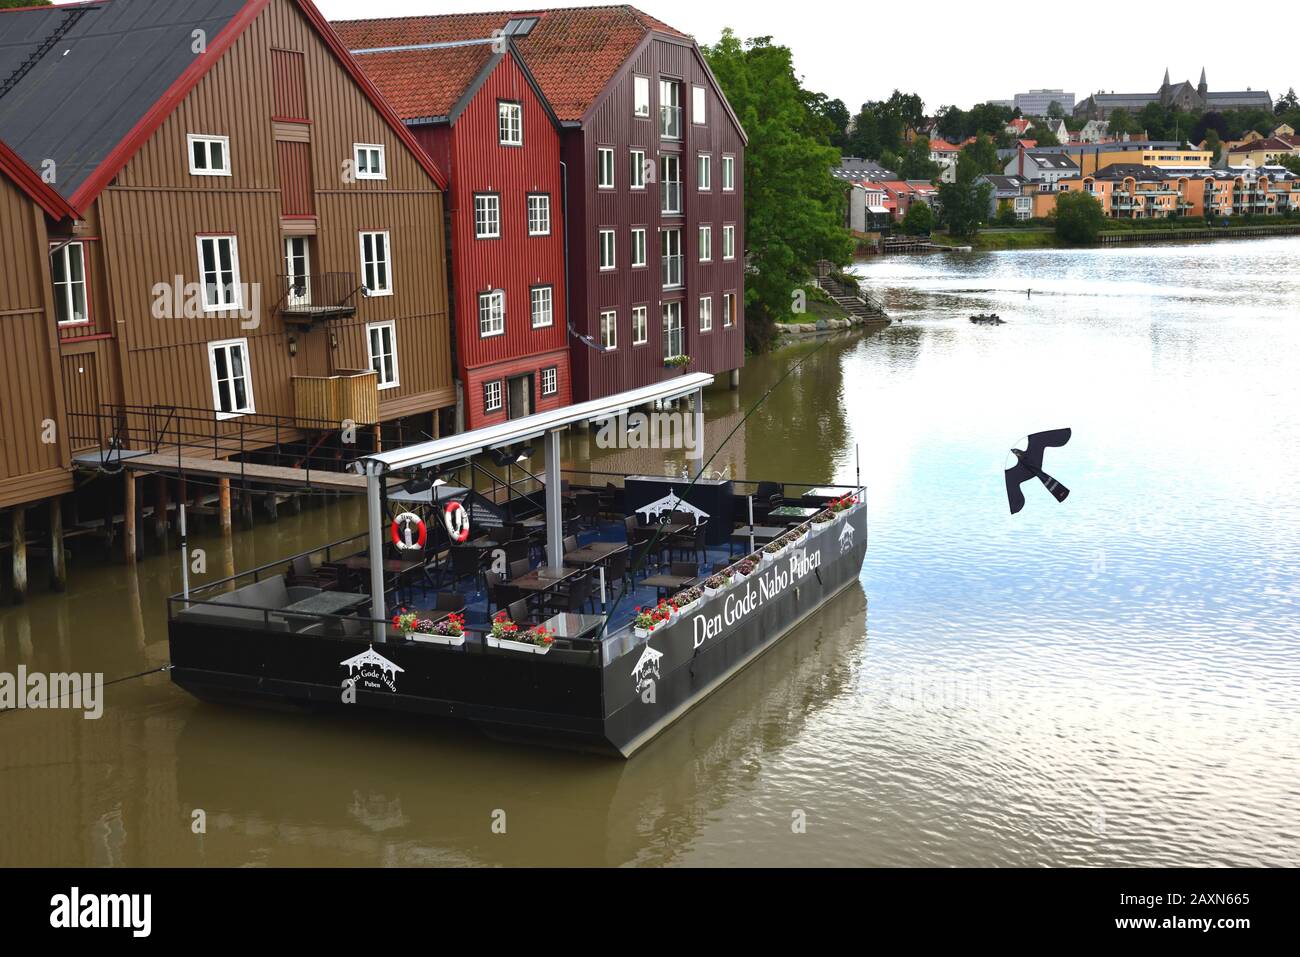 Den Gode Nabo Puben, or The Good Neighbour Pub, is situated on the Nidelva River in the Bakklandet district of Trondheim, Norway. Stock Photo